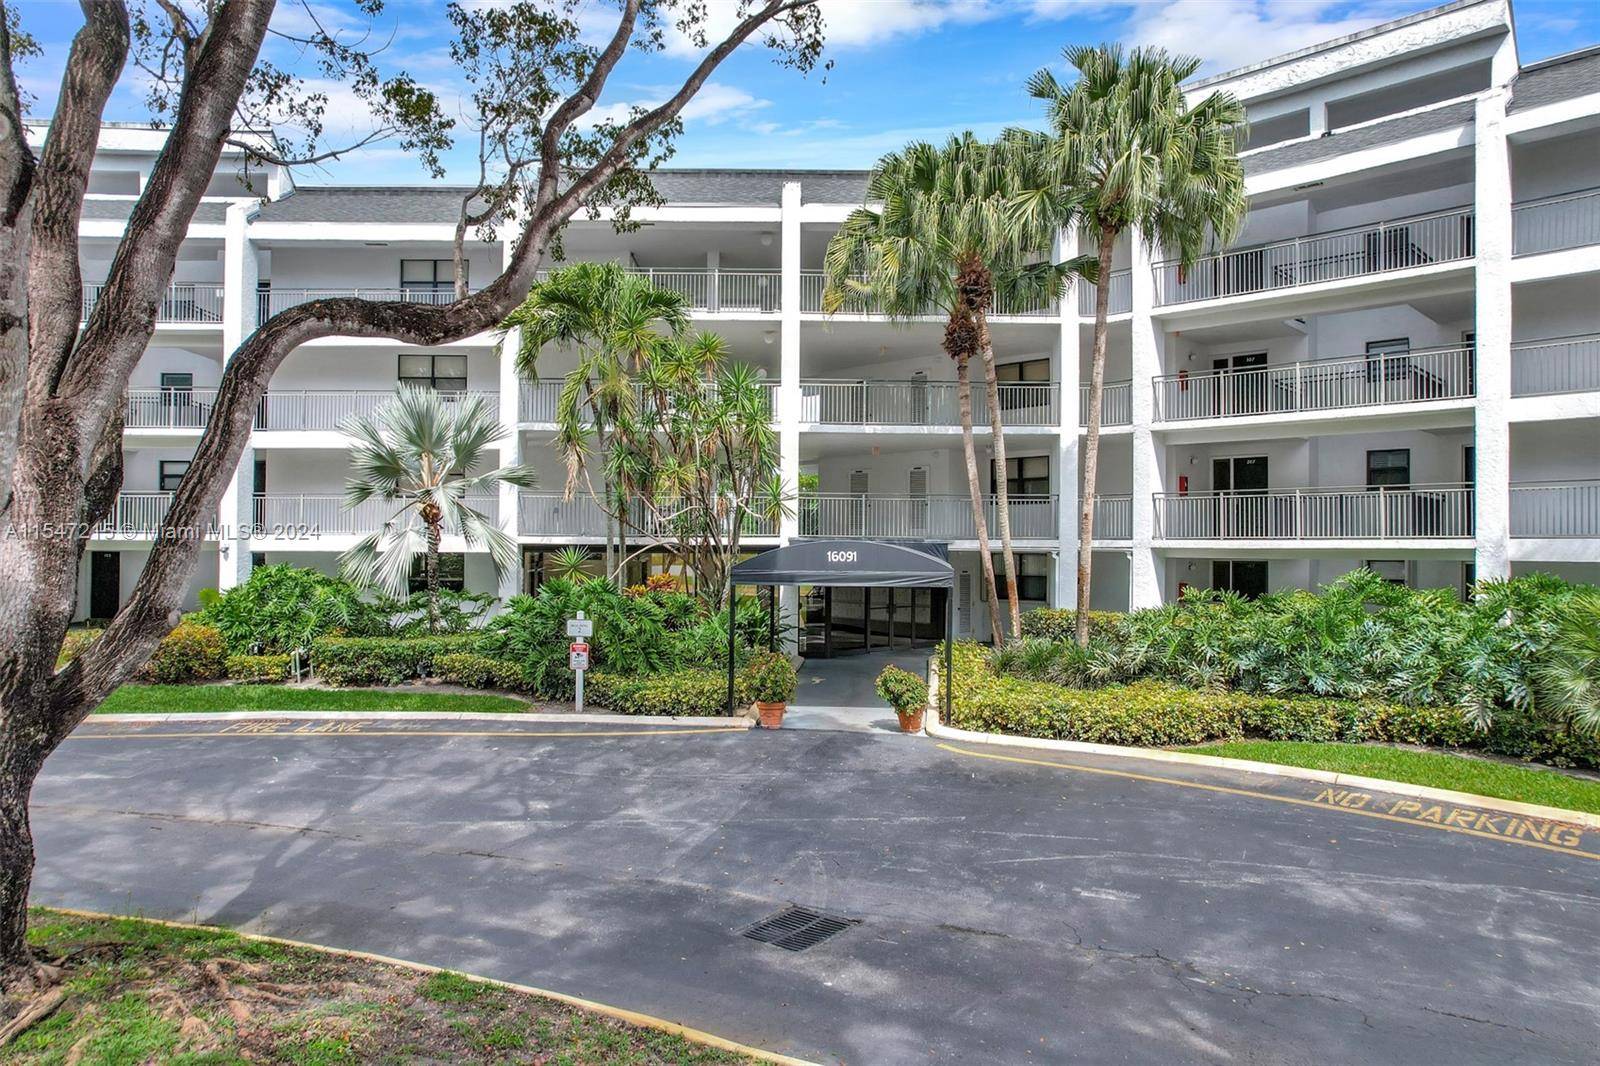 Charming 2 bedroom, 2 bathroom condo in Weston with a tranquil garden view.